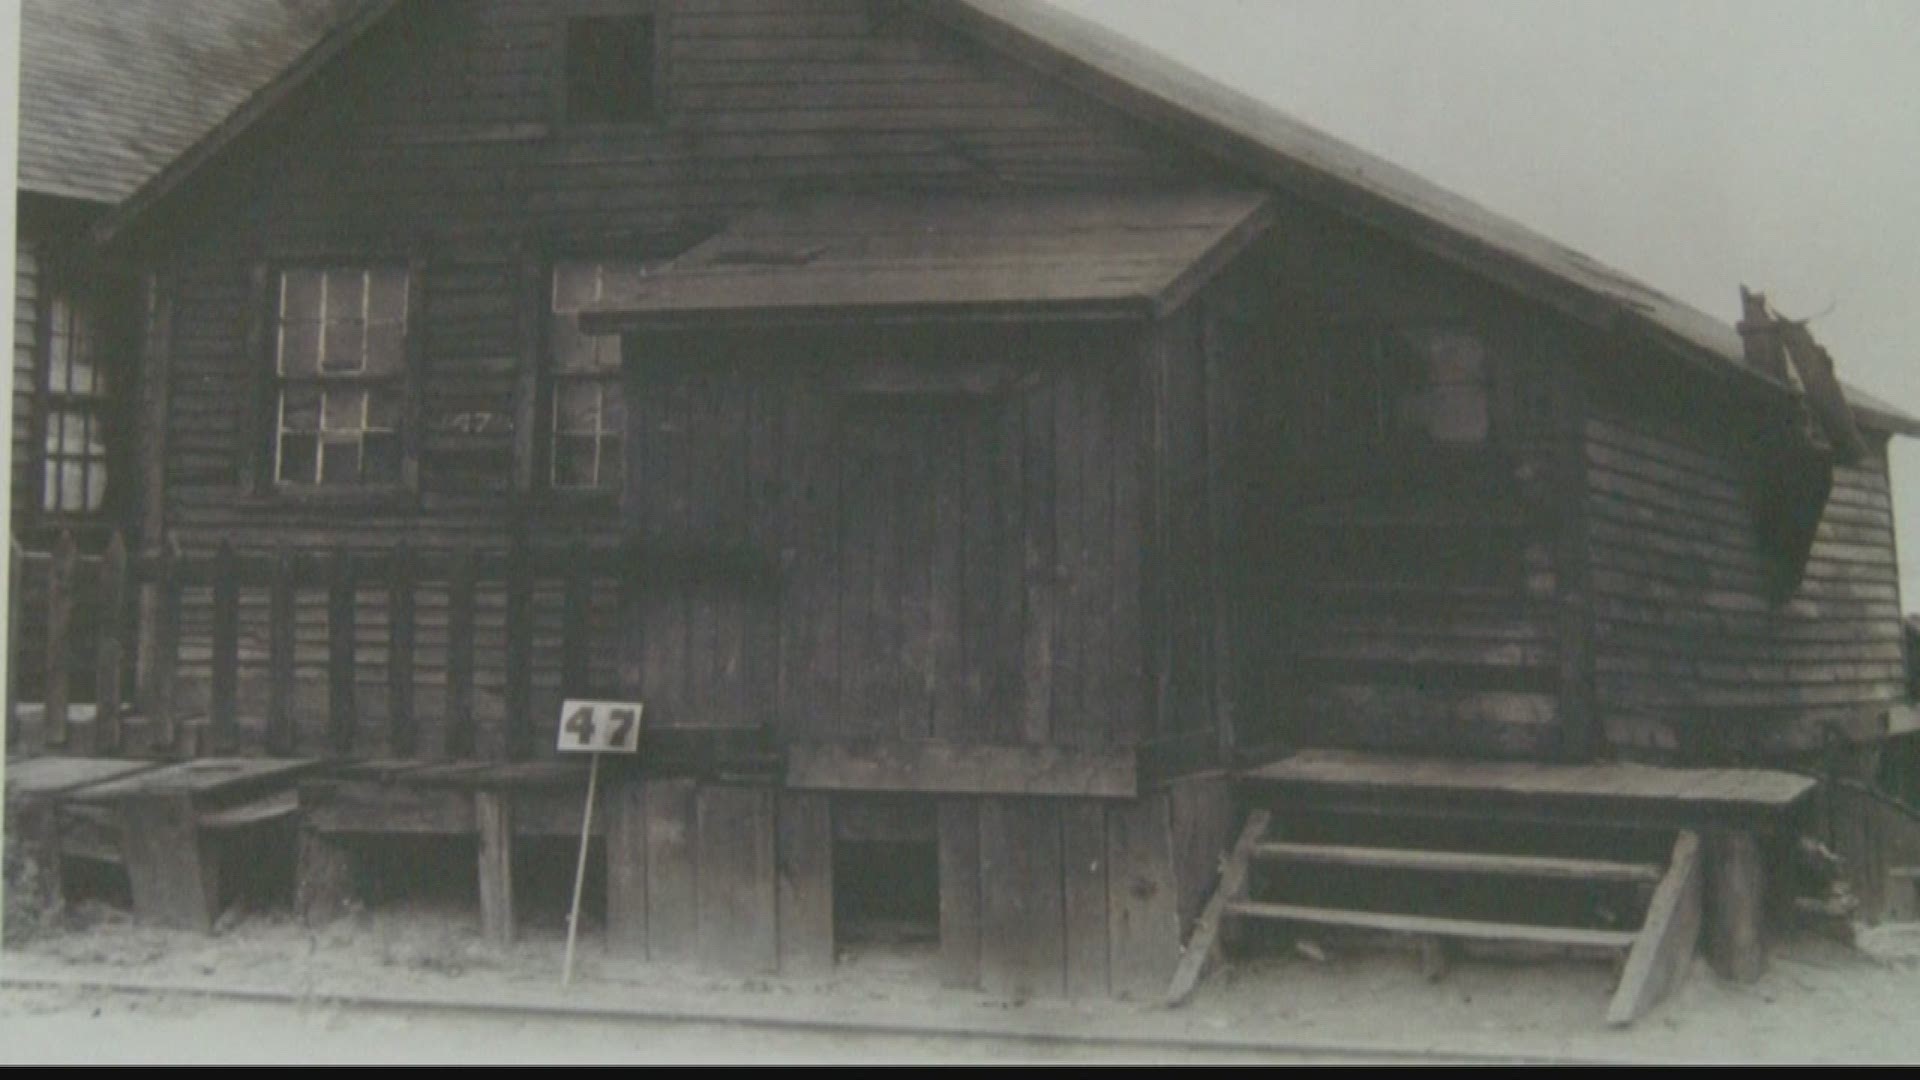 The story of buffalo early Irish immigrants who made their home on the outer harbor.